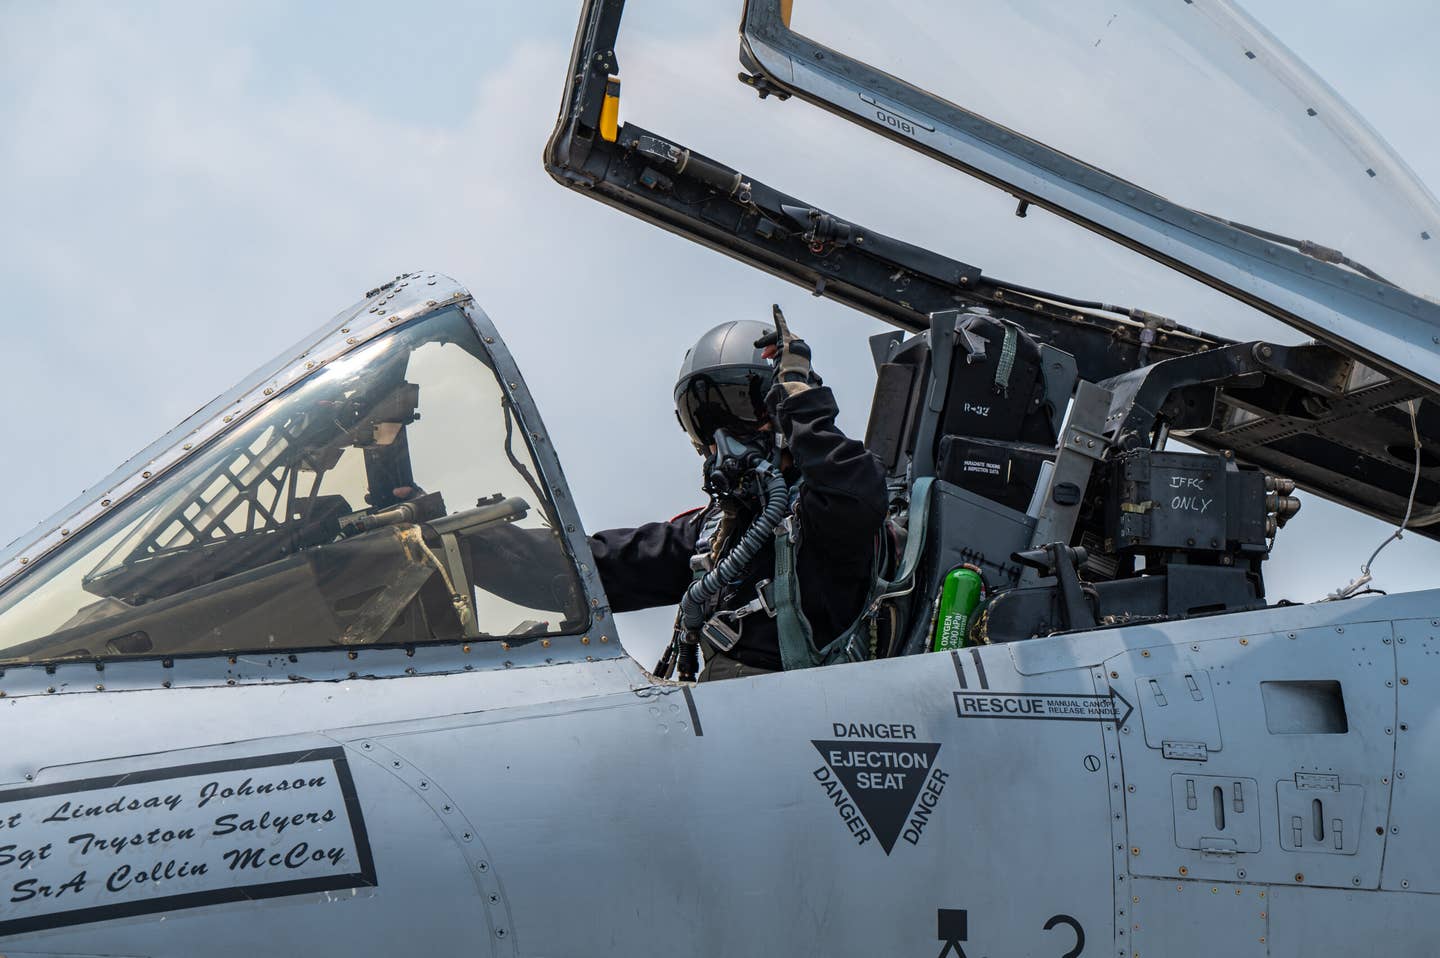 Capt. (now Maj.) Lindsay “Mad” Johnson, A-10 Thunderbolt II Demonstration Team commander and pilot, performs an aerial demonstration during the Shop n' Save Westmoreland Air Show, Pennsylvania, June 17, 2023. <em>U.S. Air Force photo by Staff Sgt. Alex Stephens</em>